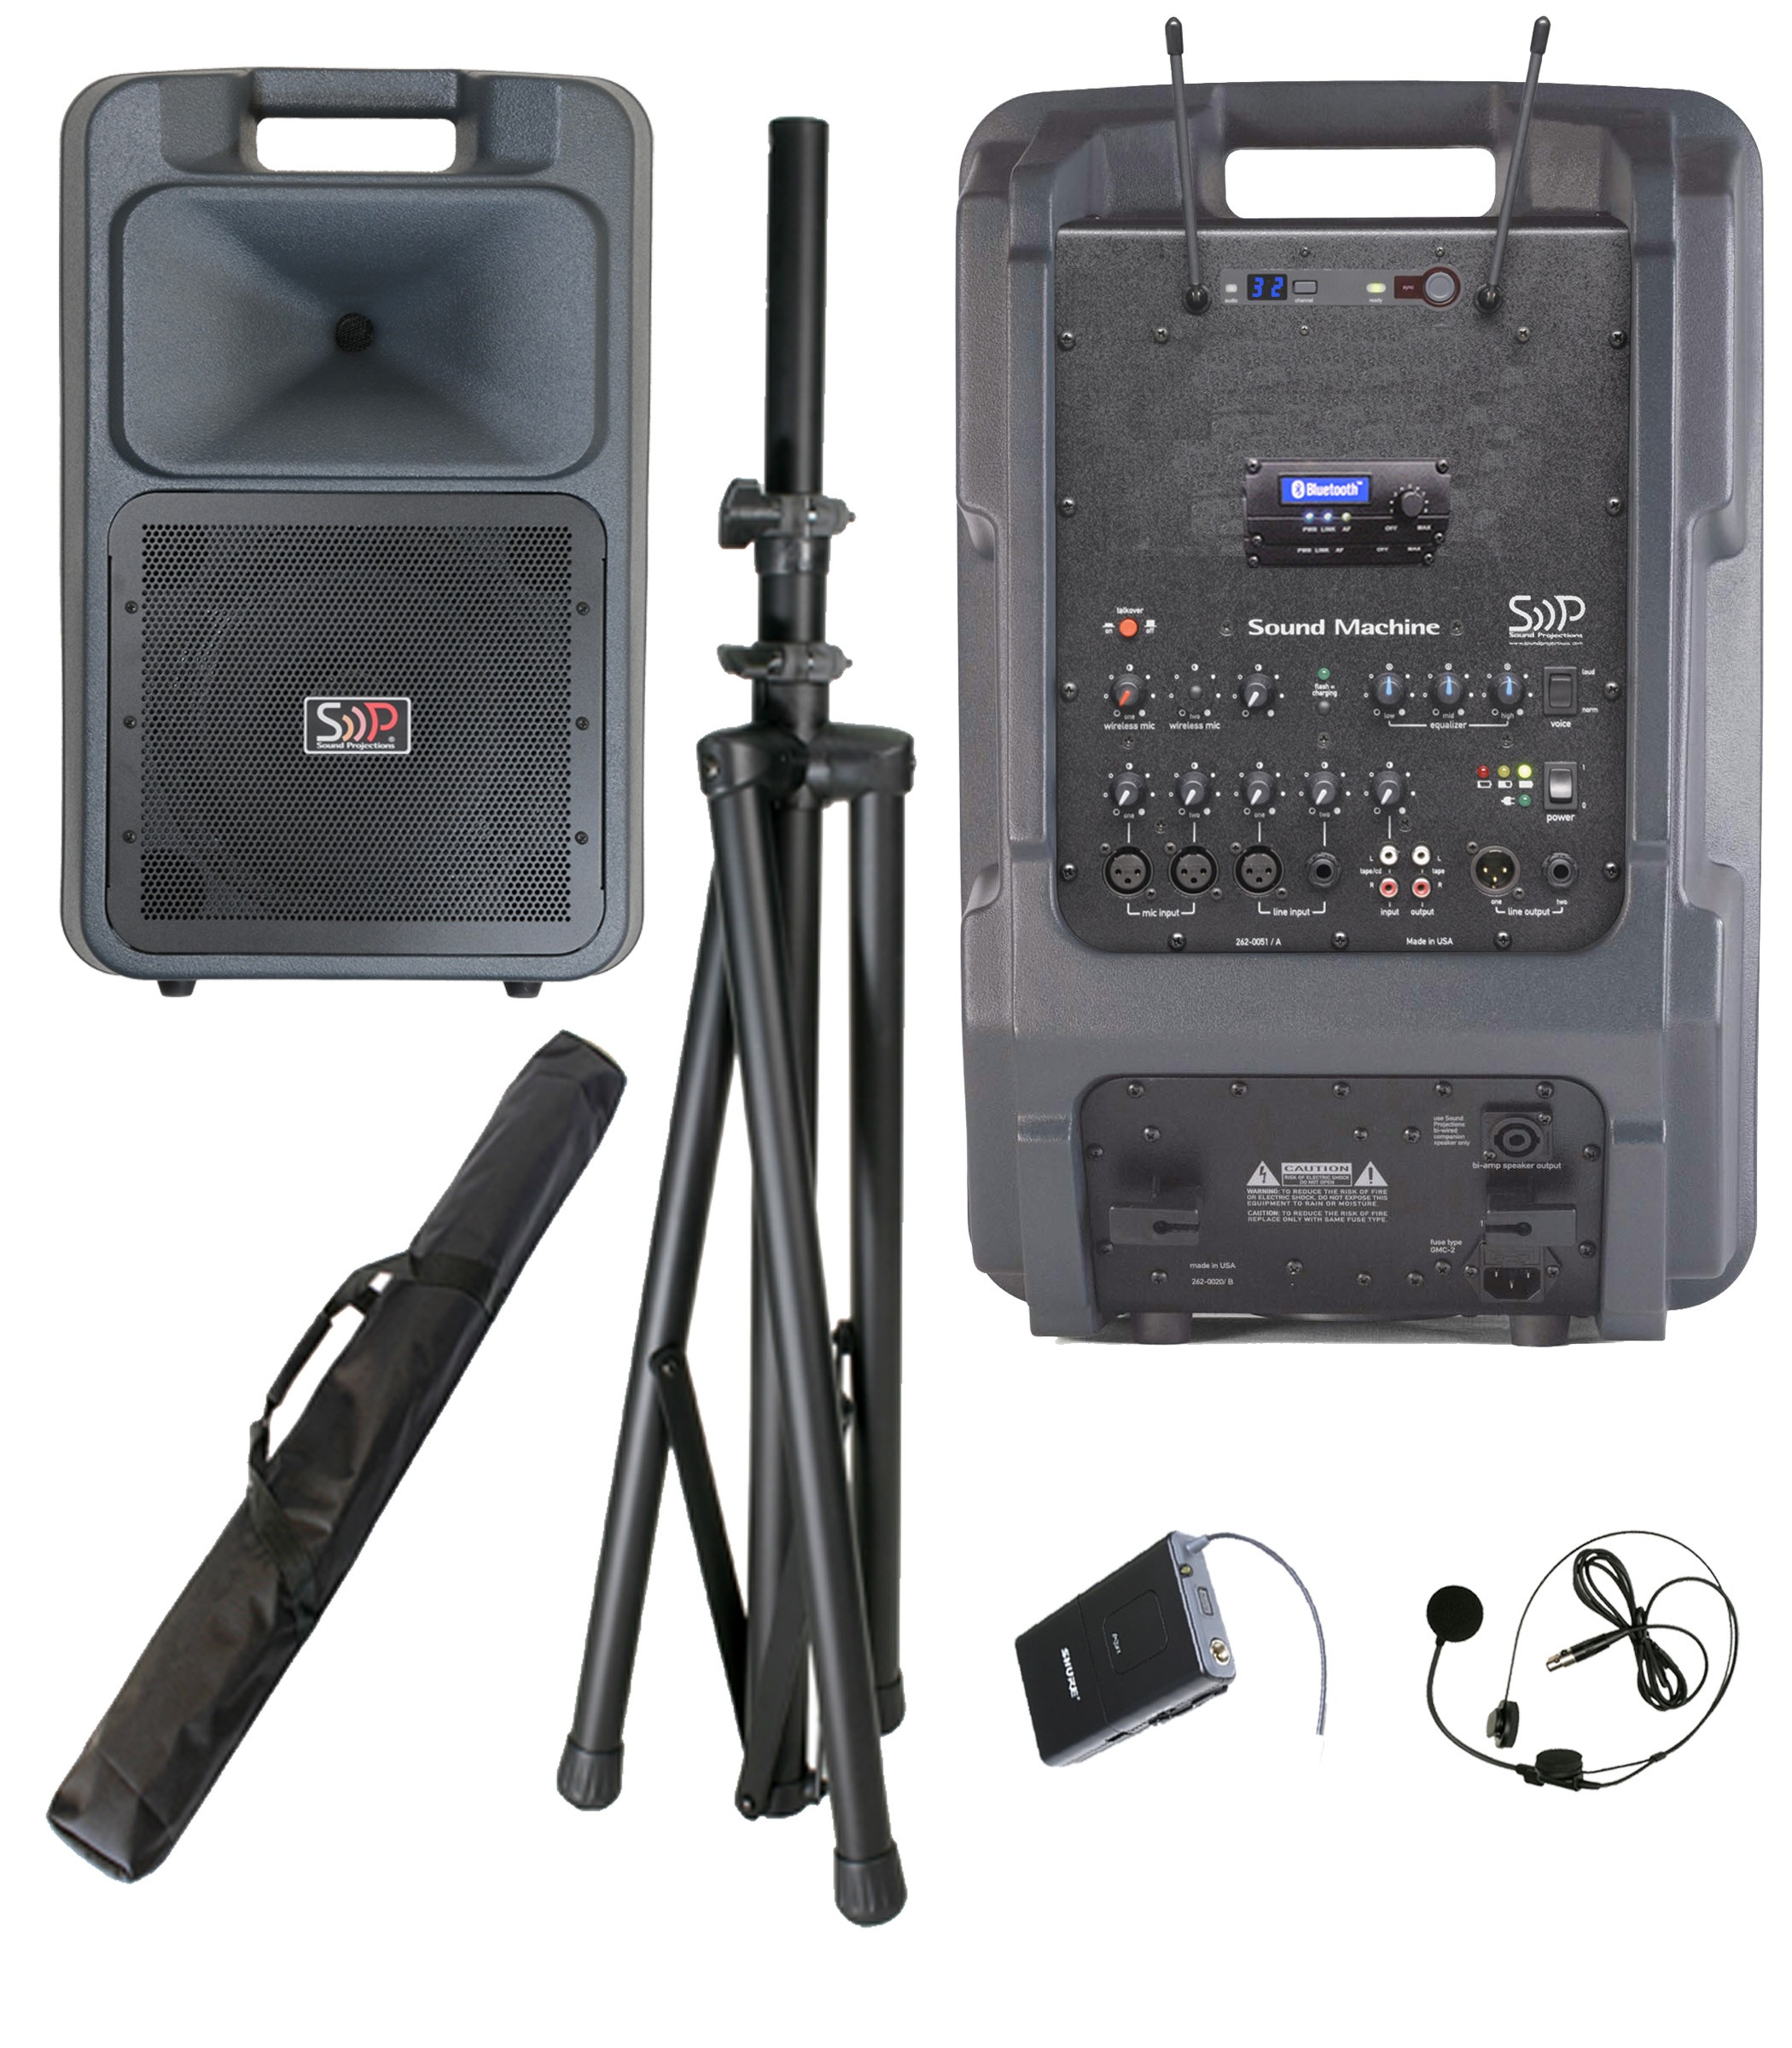 SM-5 with 60ch. Digital headset wireless OPT-600 BlueTooth package